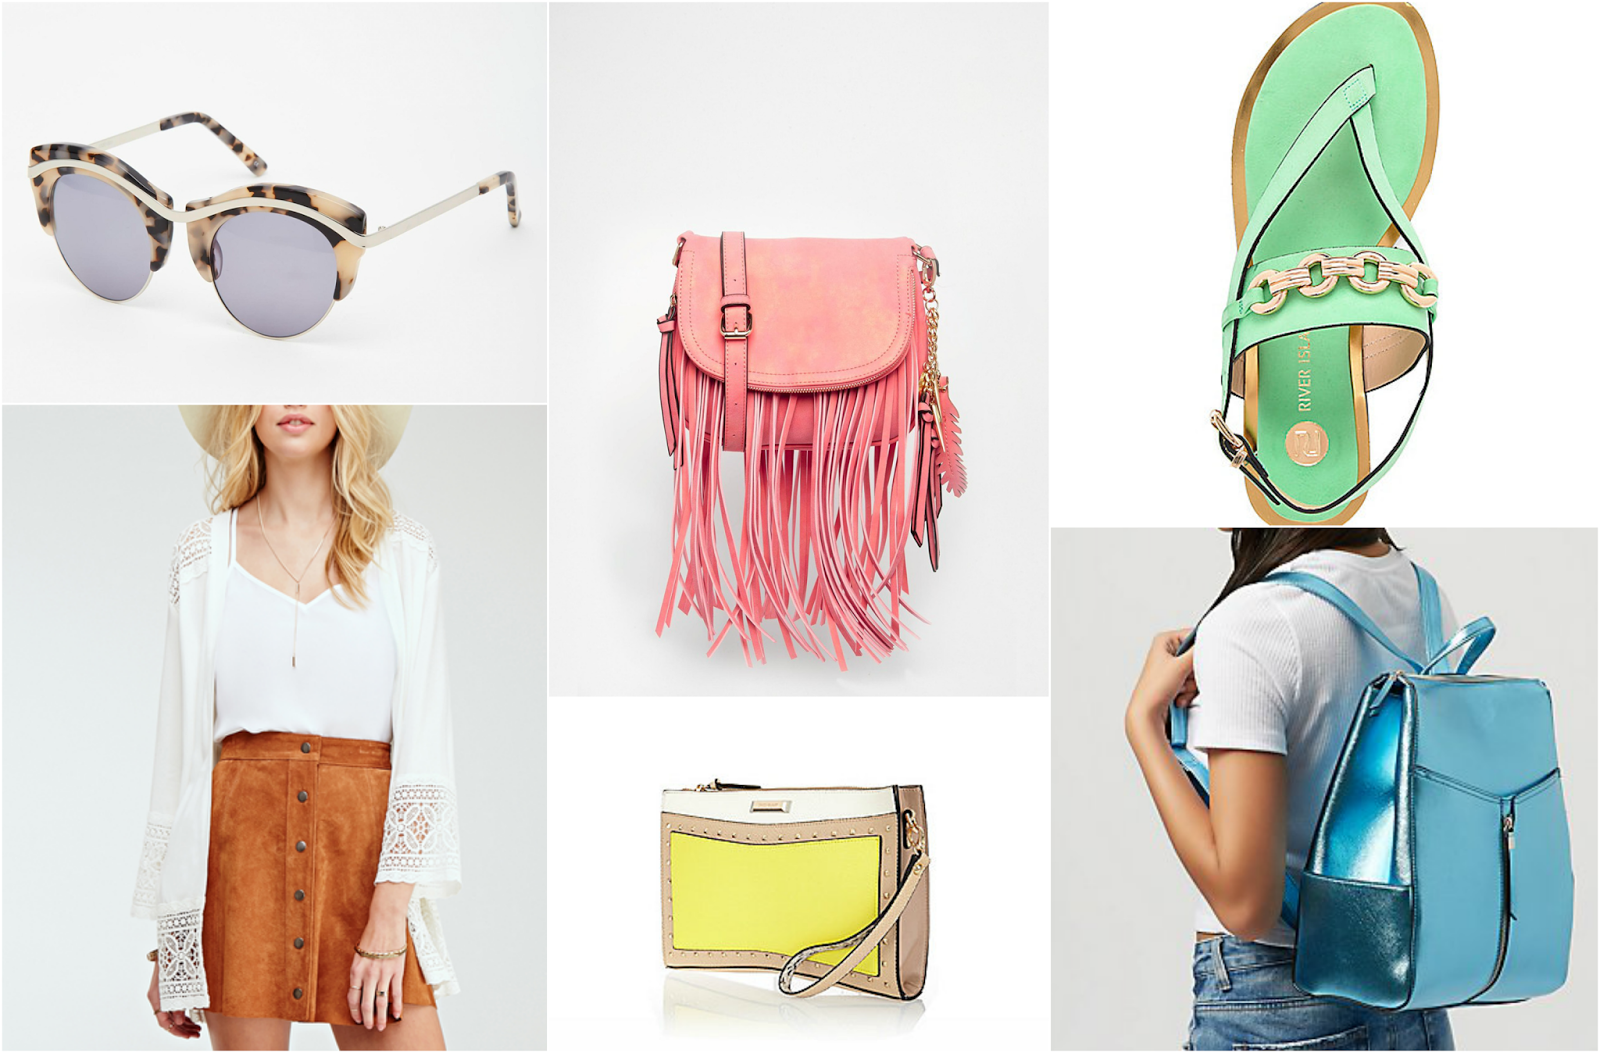 spring style fashion trends new look asos river island forever 21